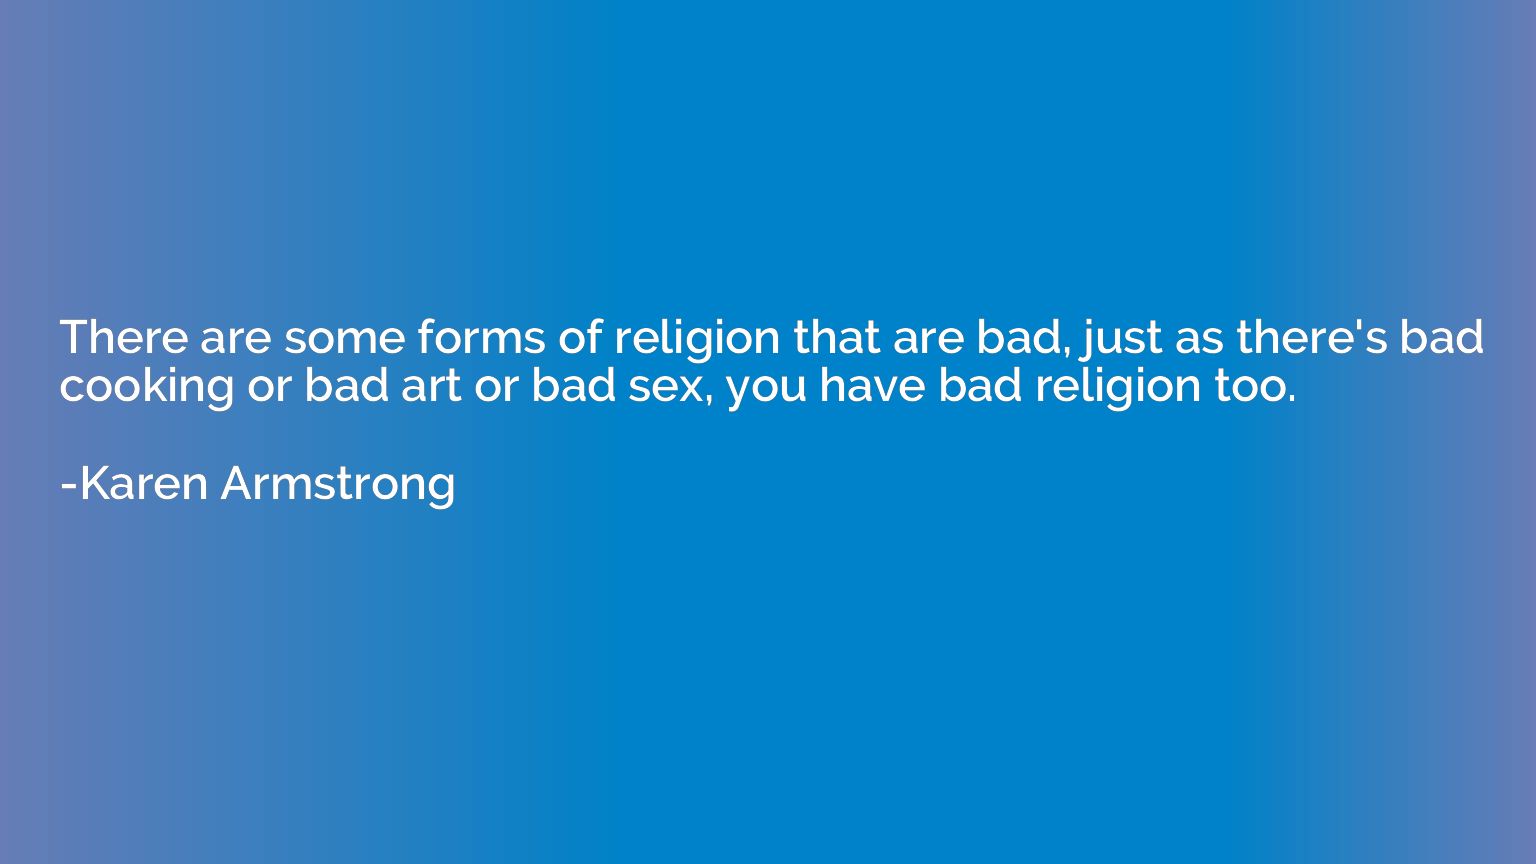 There are some forms of religion that are bad, just as there